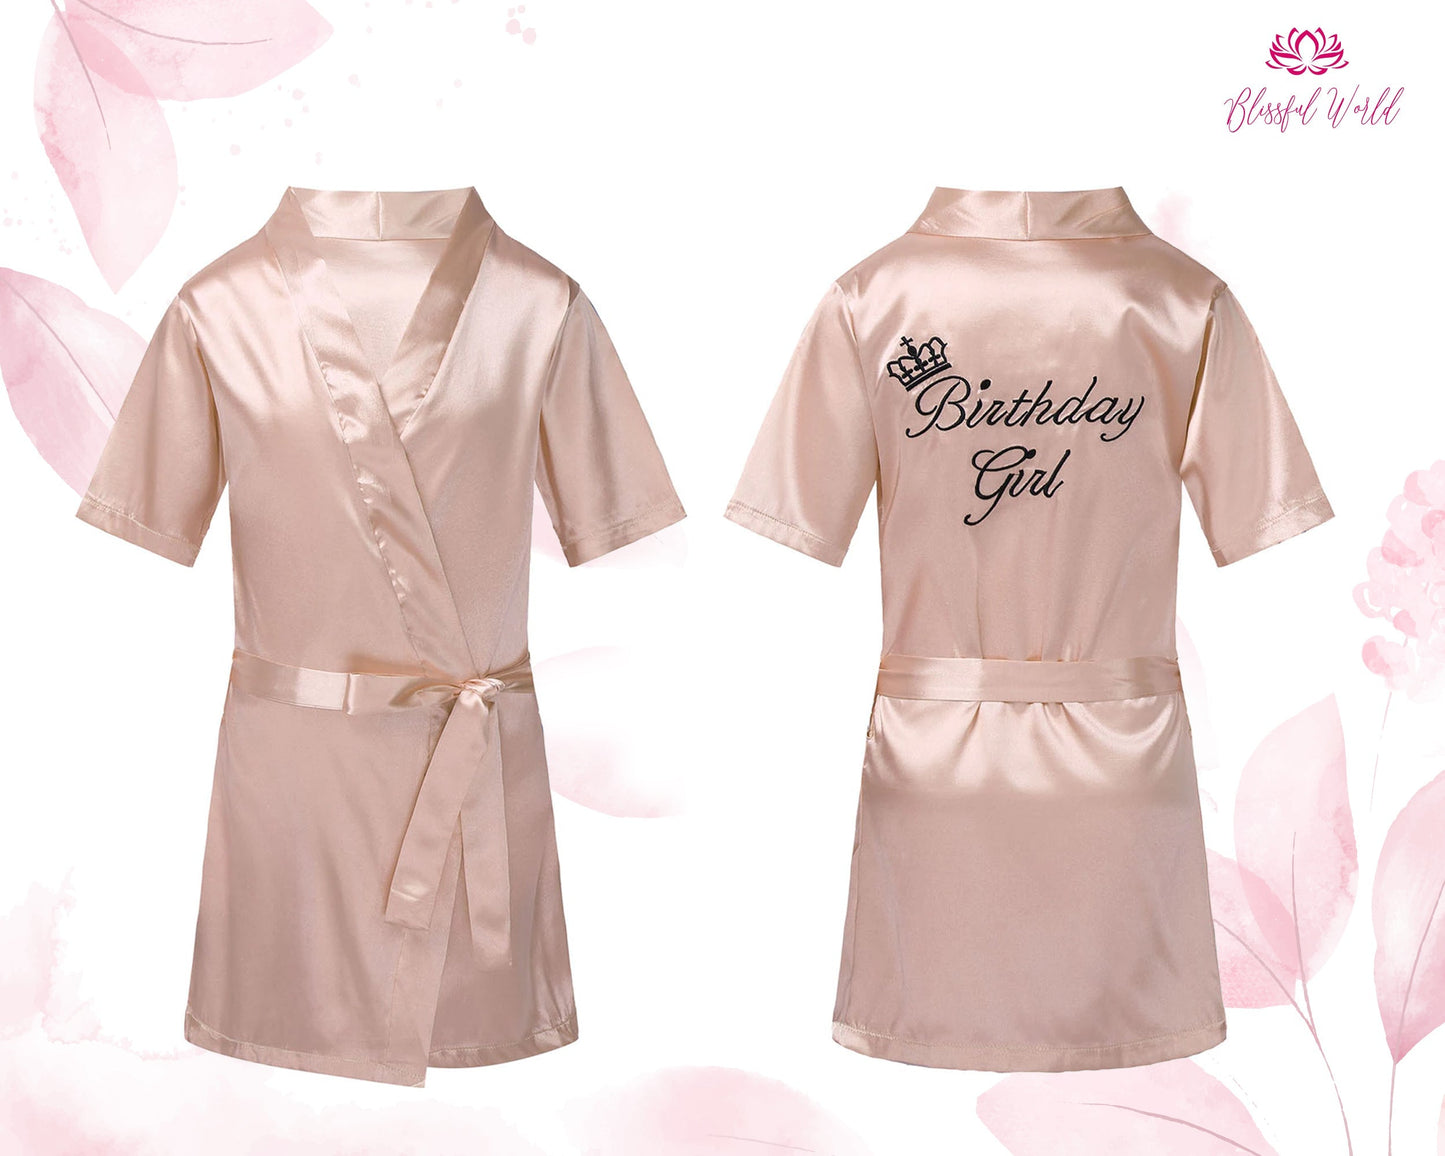 Custom Kids Robes Flower Girl Robes Satin Robes Personalized Robes Bridal Robes Customized Kimono Robes Gift For Her Wedding Gift